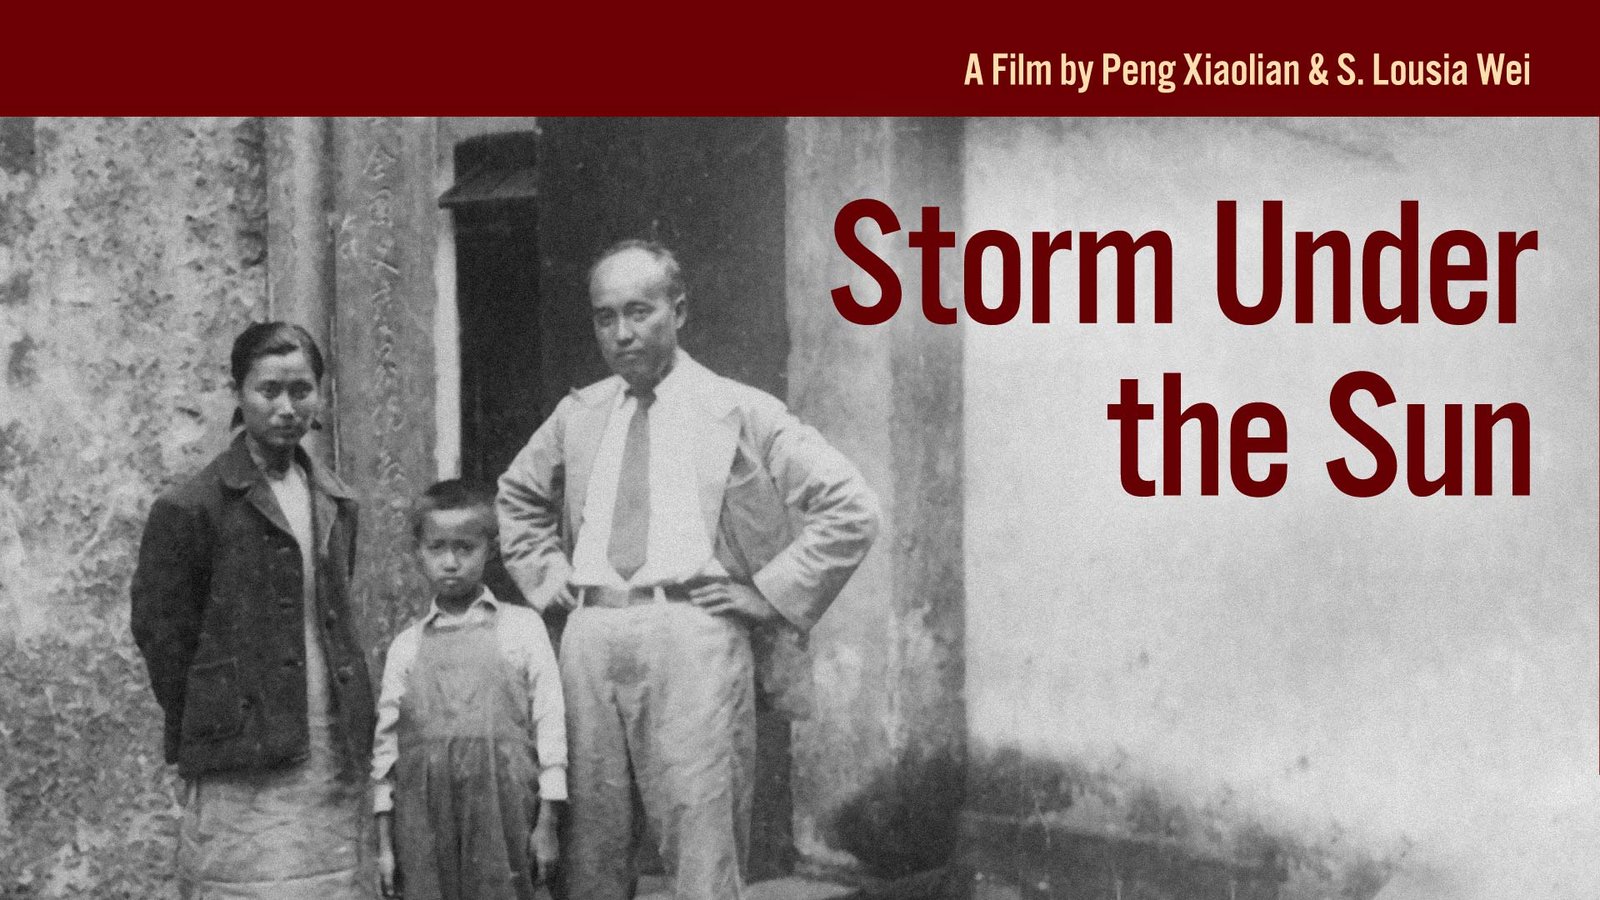 Storm Under the Sun - The Persecution of a Writer Fighting for Artistic Freedom